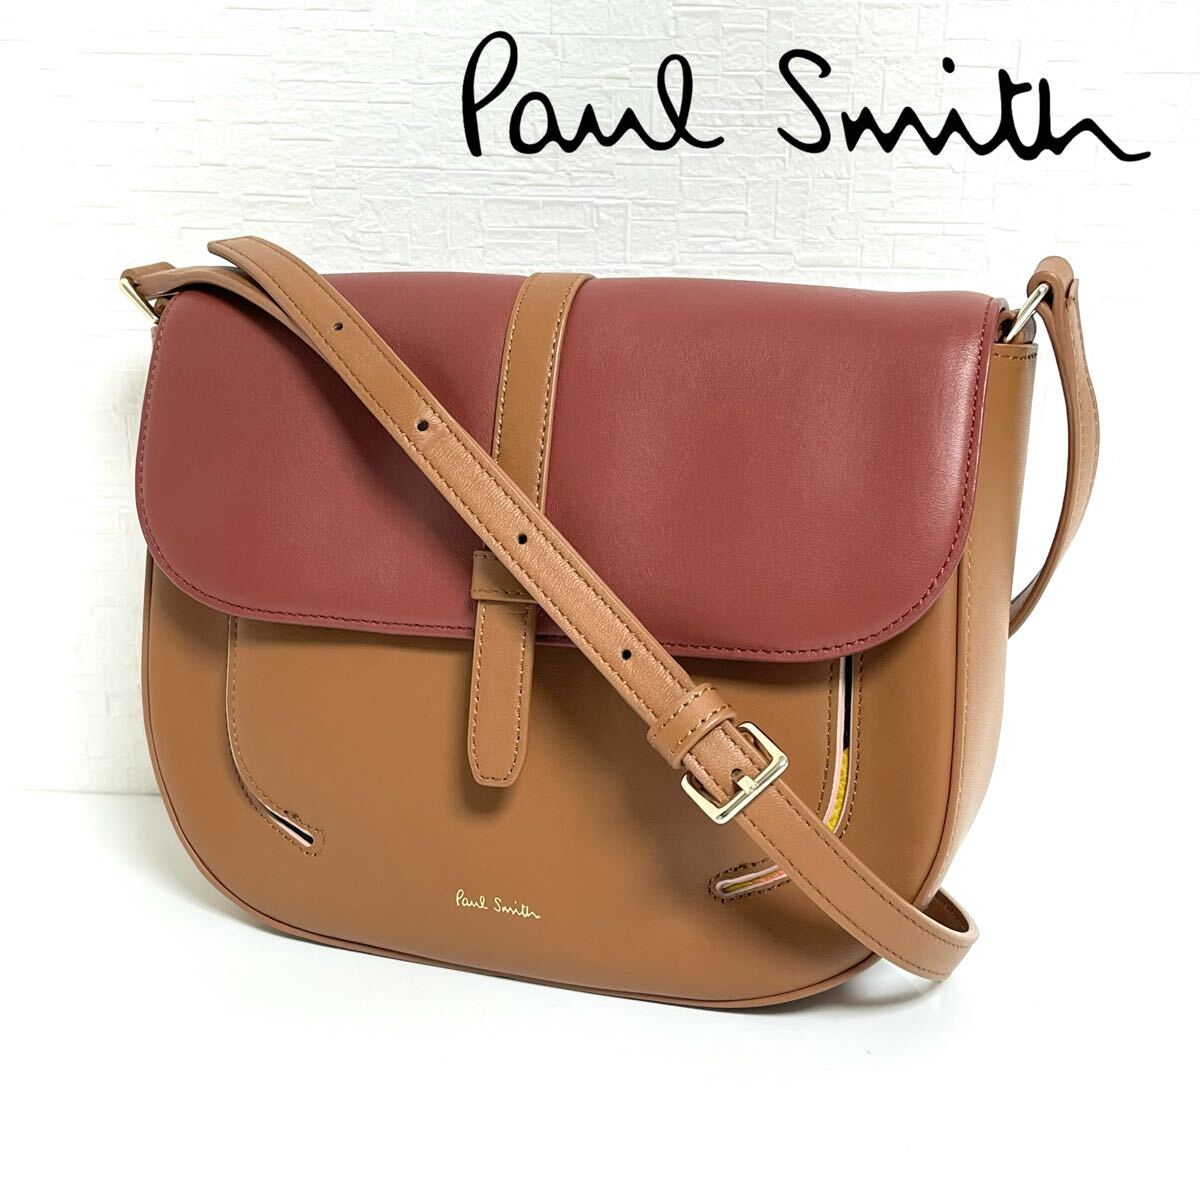 Paul Smith Paul Smith swirl in set shoulder bag leather cow leather lady's multi stripe bordeaux Brown 